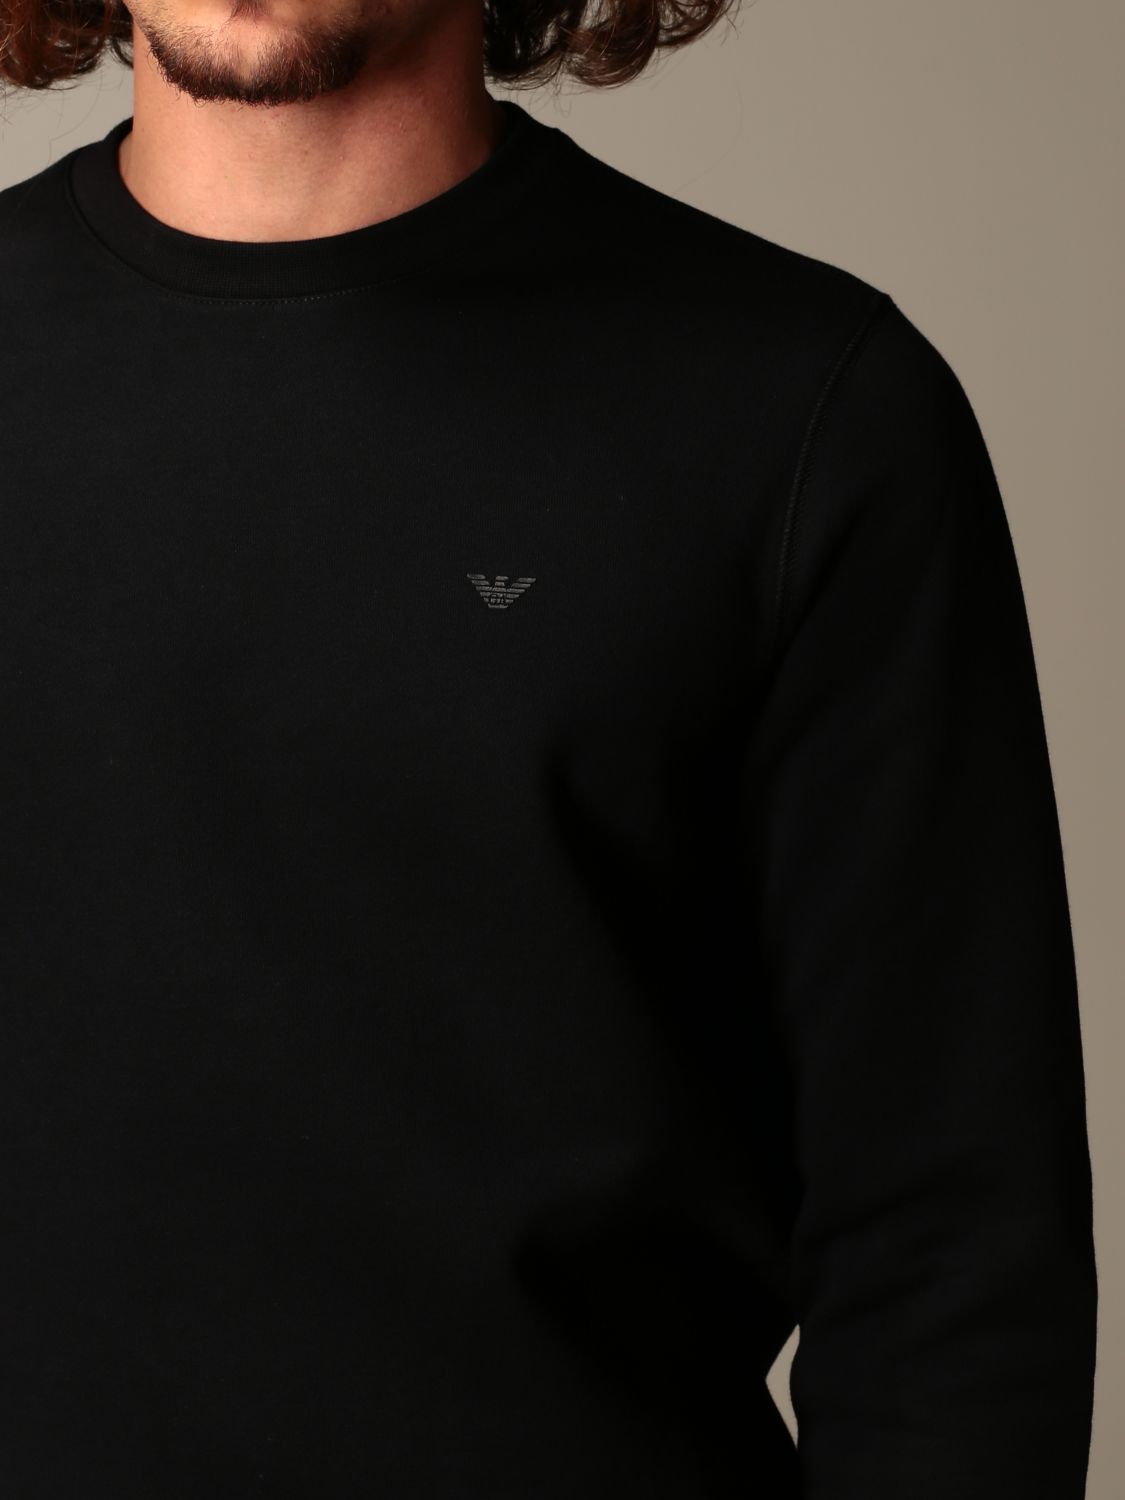 Emporio Armani Outlet: sweater in cotton blend with logo | Sweatshirt ...